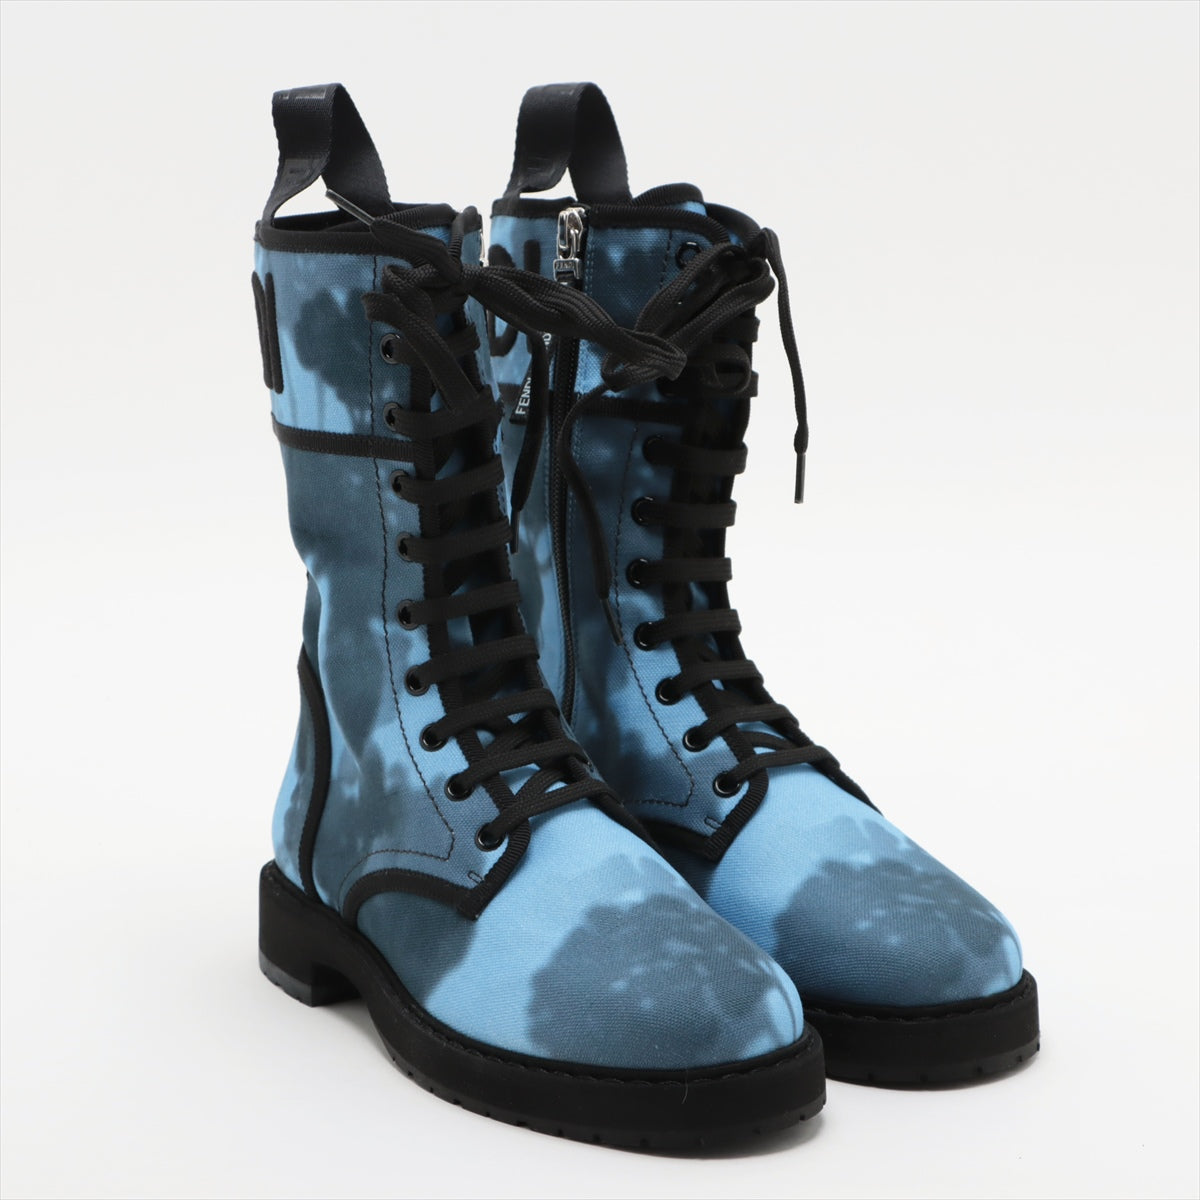 Fendi canvas Boots 37 1/2 Ladies' Blue There is a box